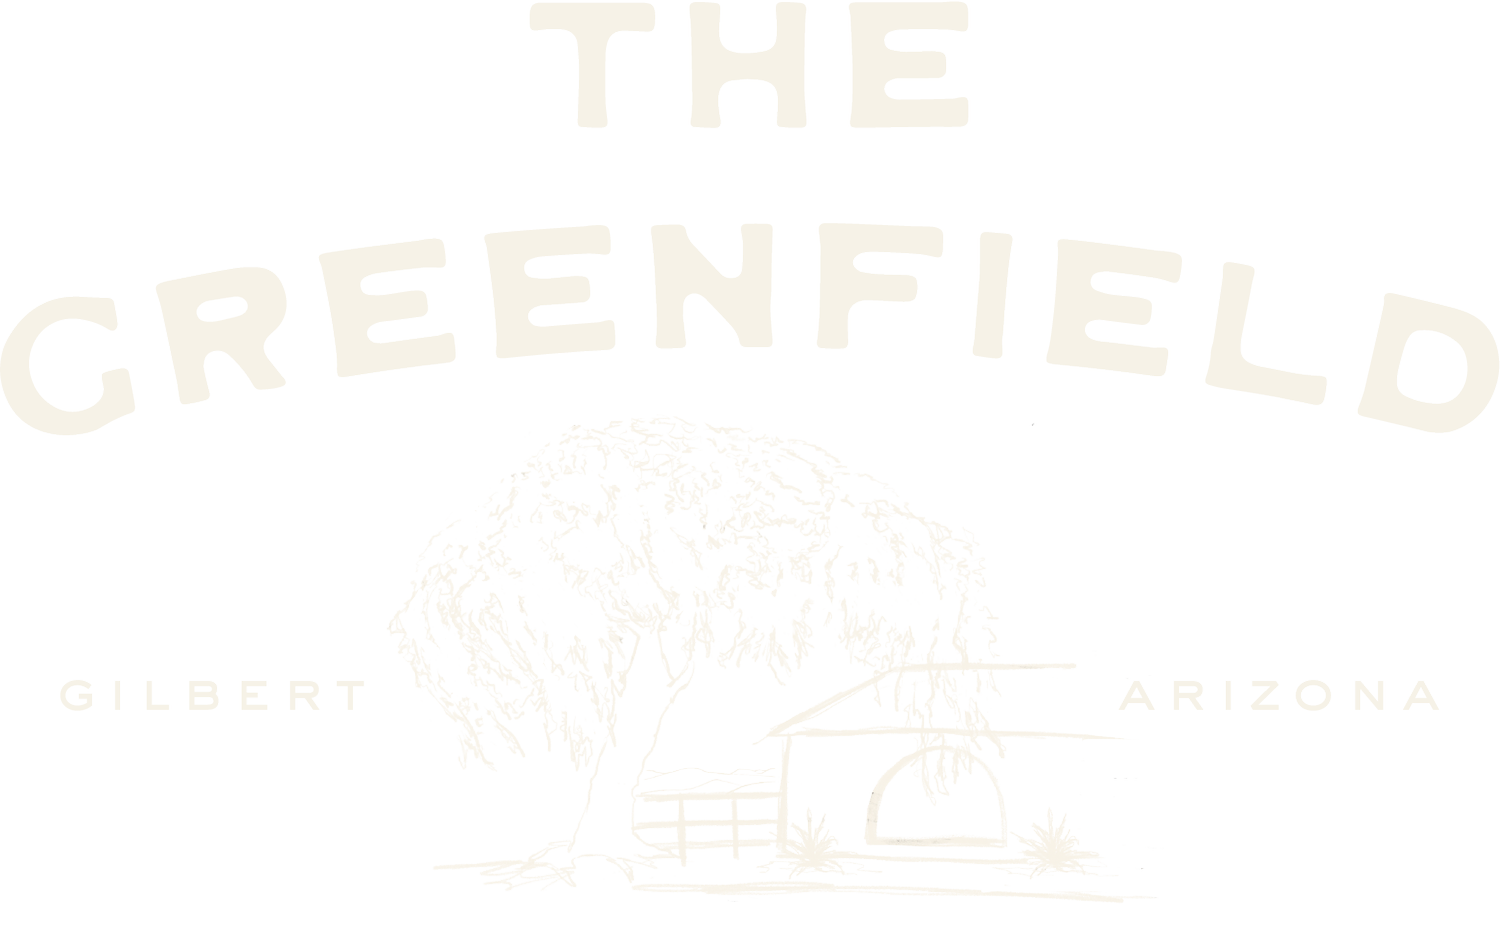 The Greenfield